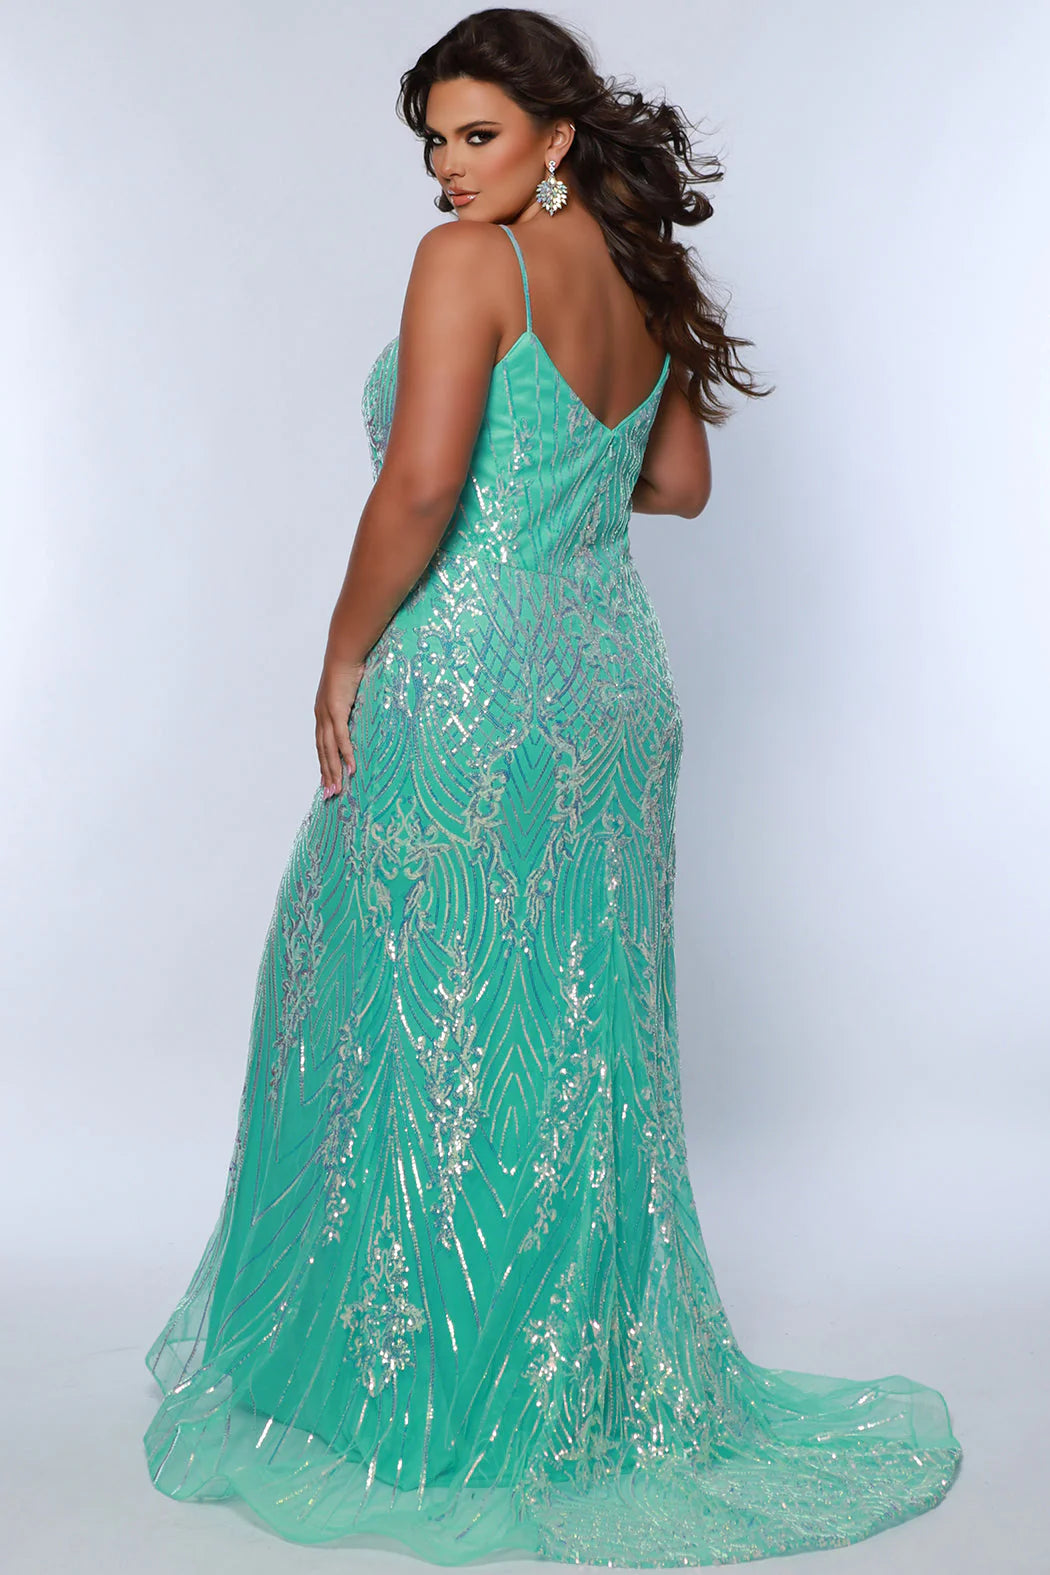 Look beautiful and timeless in this Sydneys Closet SC7366 Long Prom Dress. The fitted plus size gown is embellished with dazzling sequins and a graceful train. Perfect for your next formal event, this elegant dress is sure to make you the bright star of the night. Look glamorous on your big night in this sexy fitted Trumpet gown.